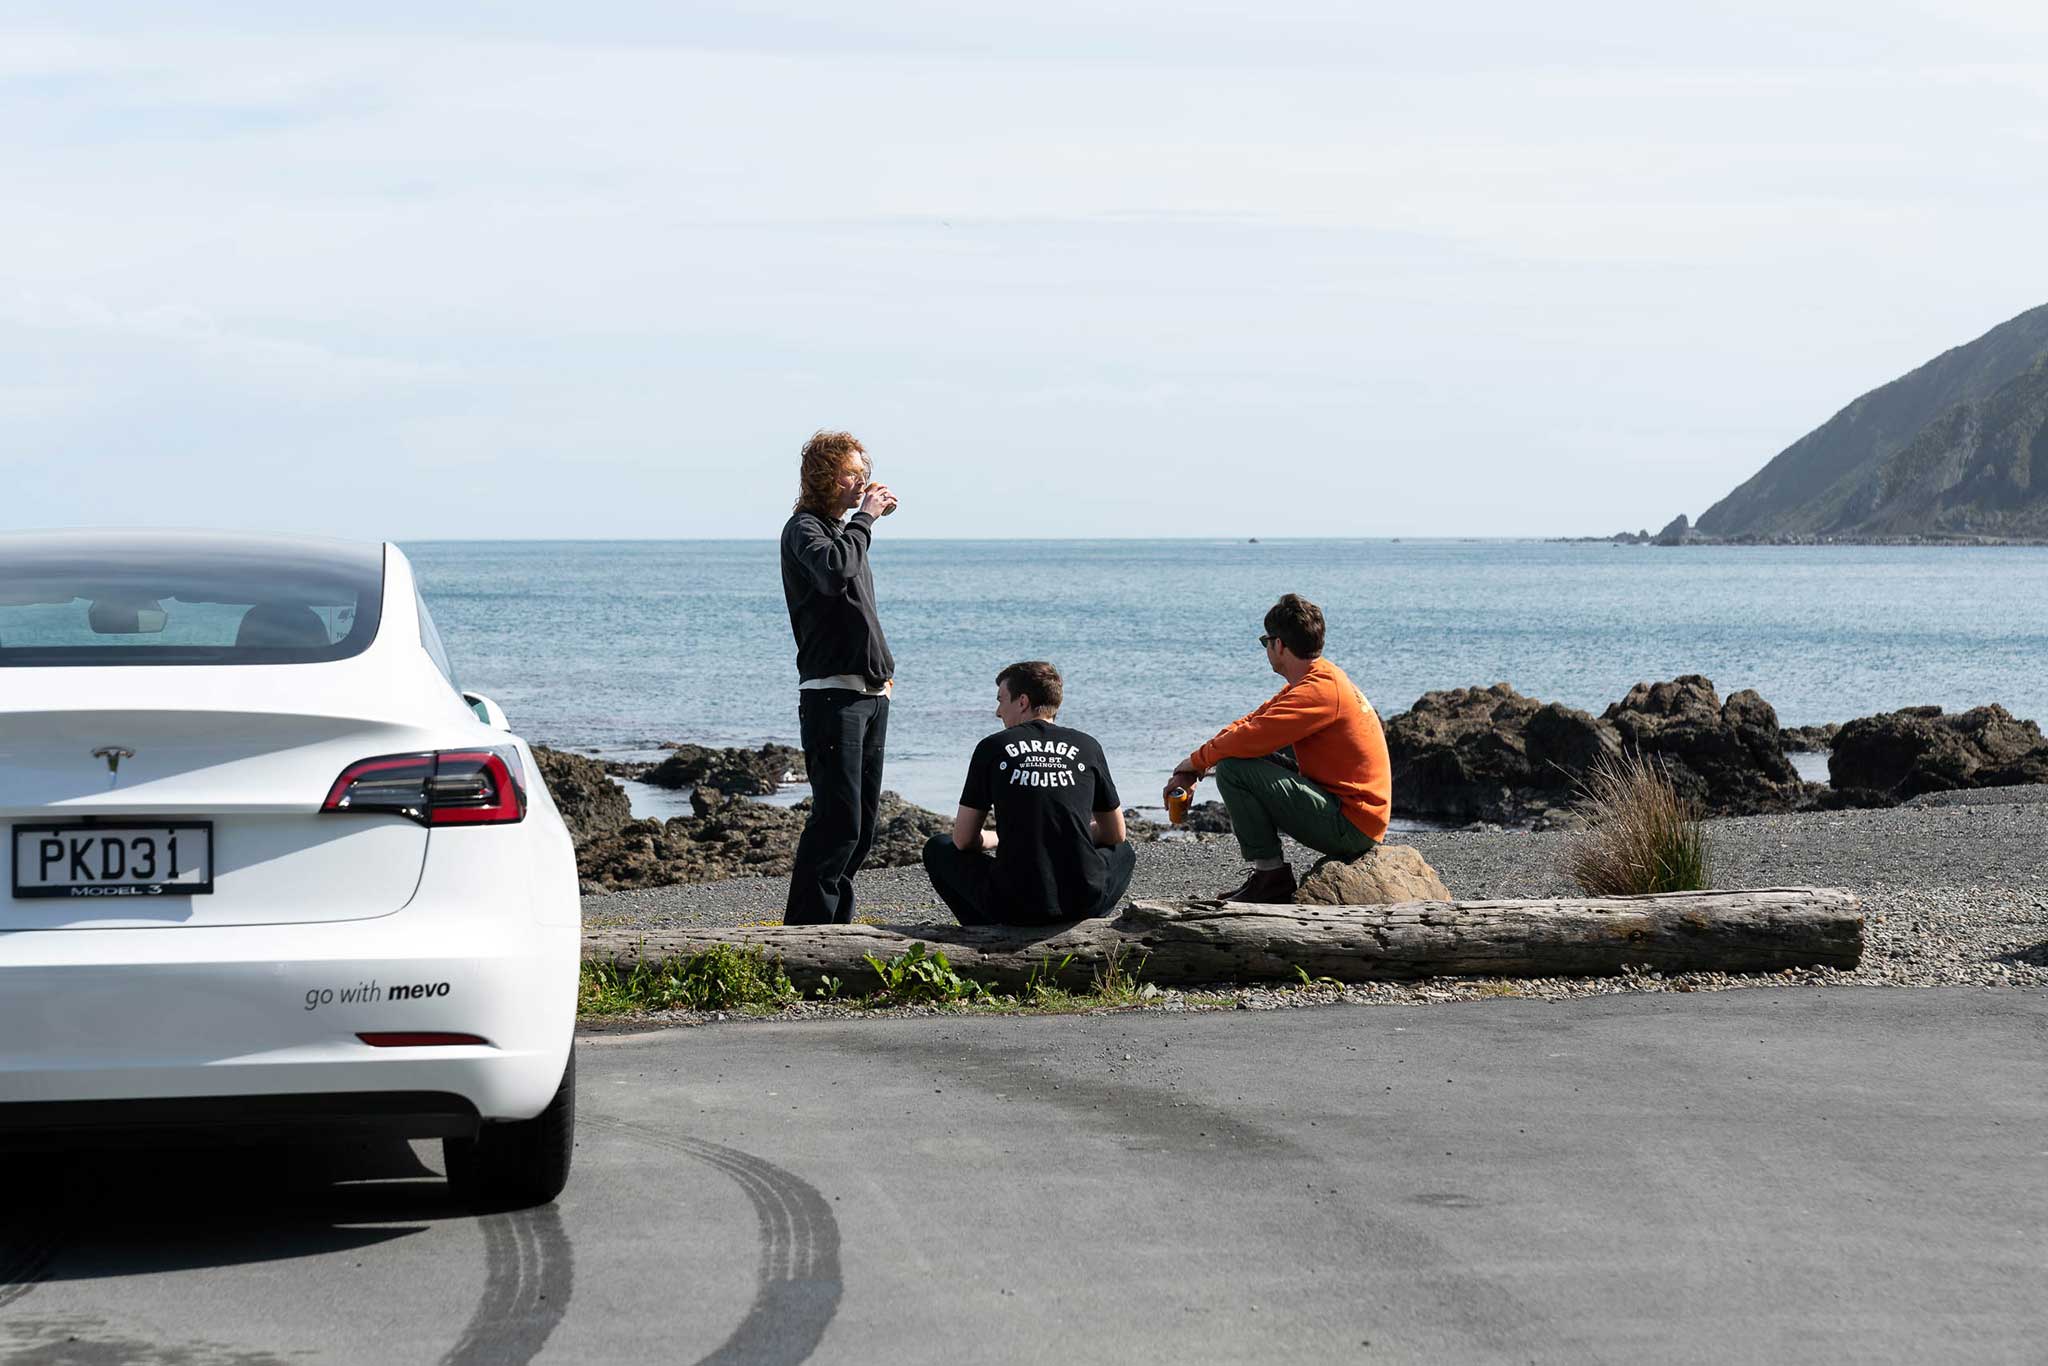 Three of the Garage Project team sitting next to a Mevo vehicle by the seaside.